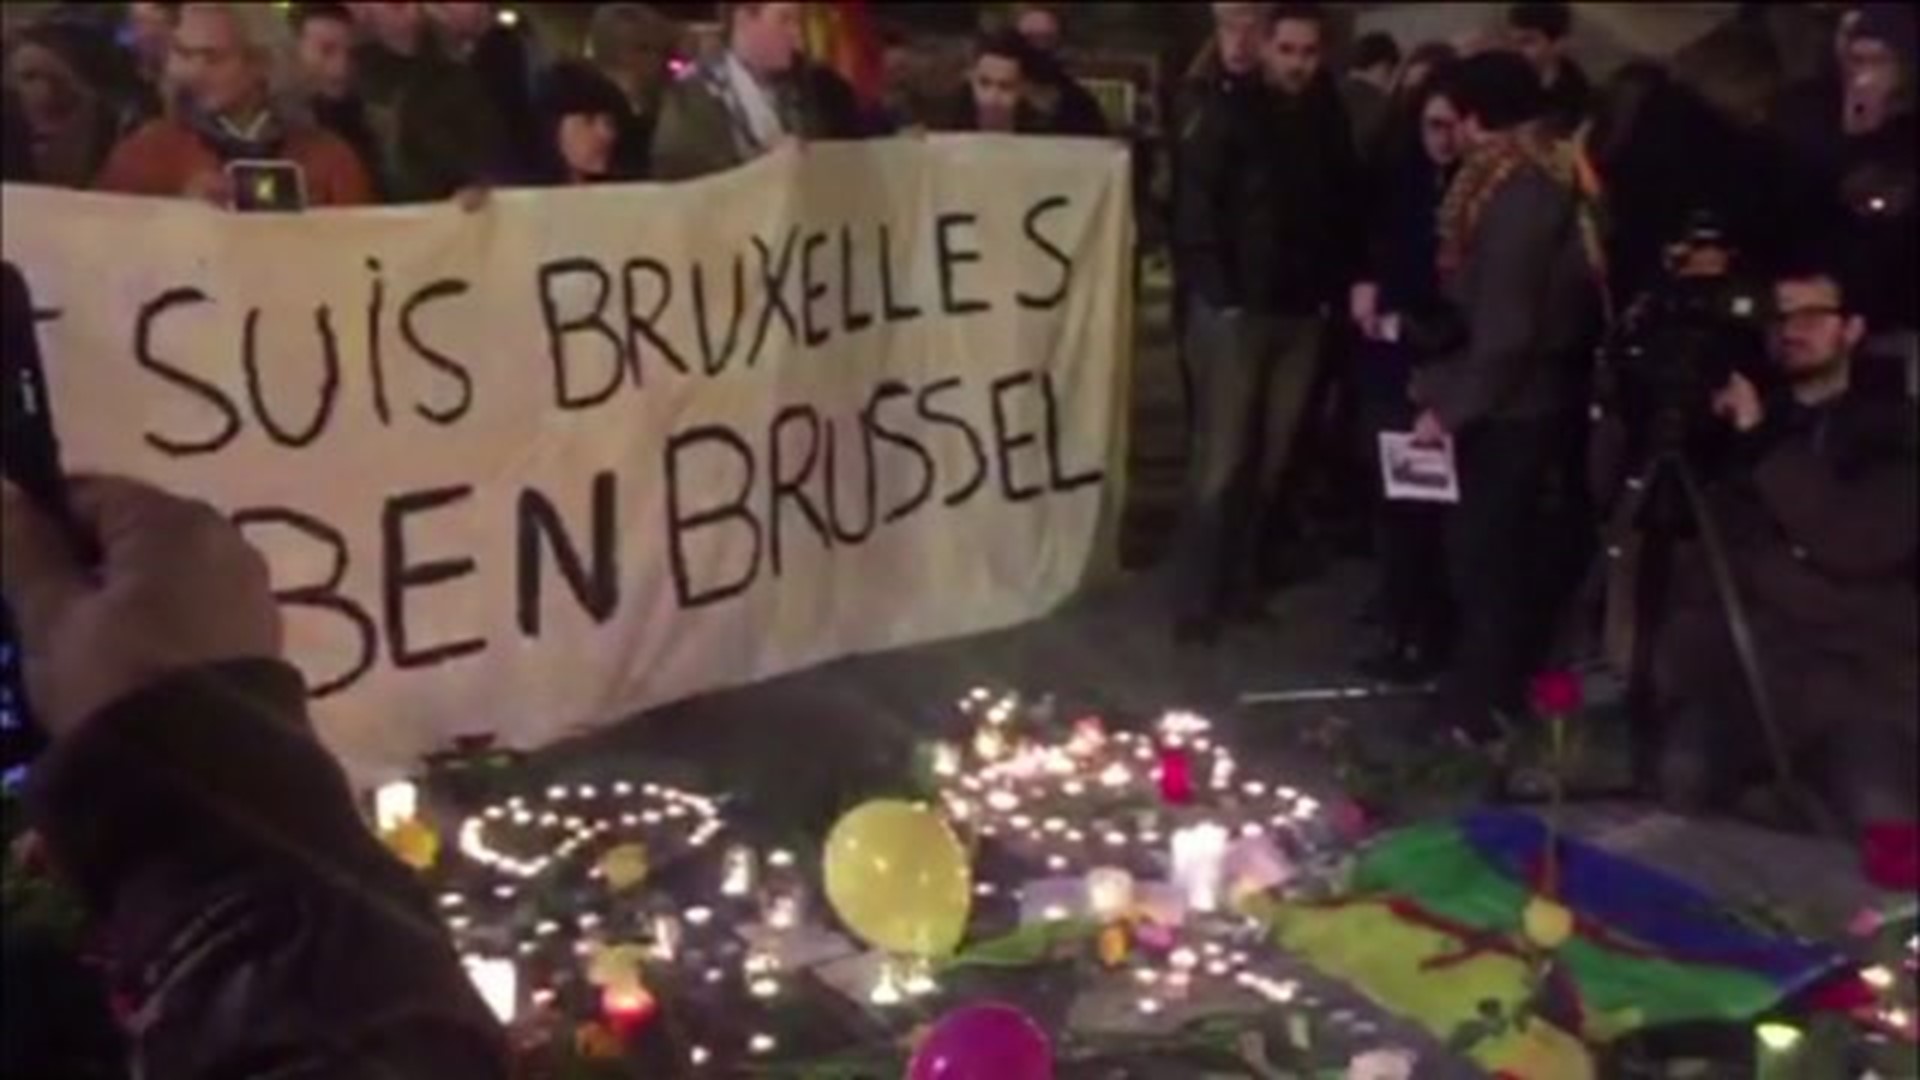 Connecticut lawmakers speak out about terrorist attacks in Brussels